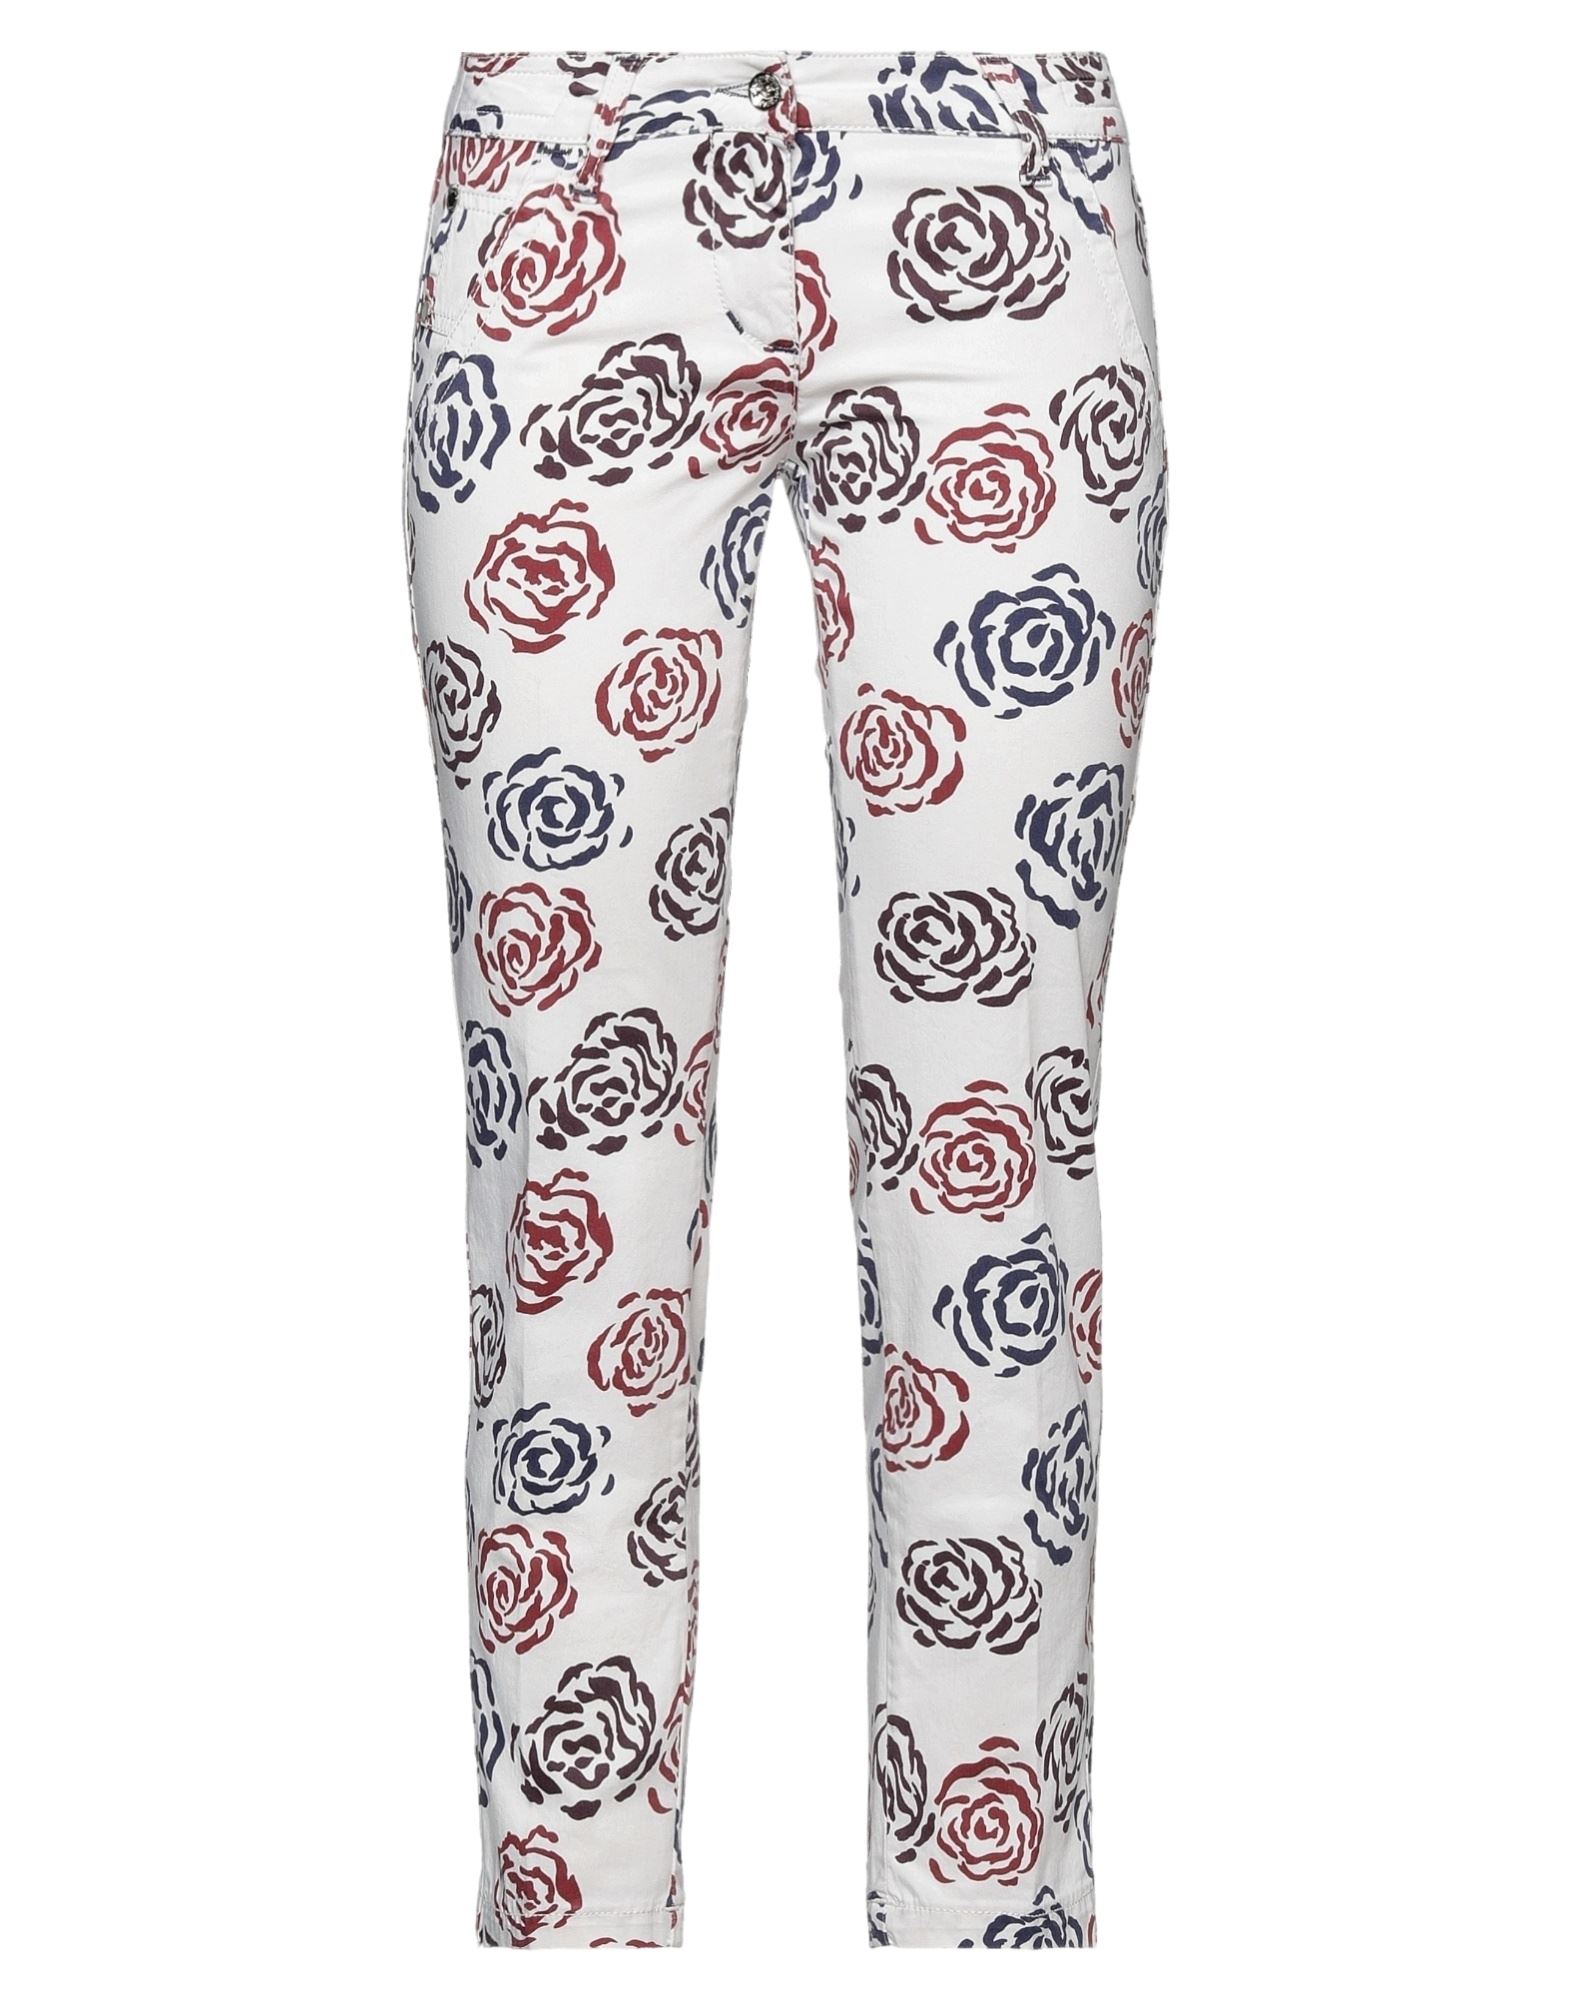 Jacob Cohёn Cropped Pants In White